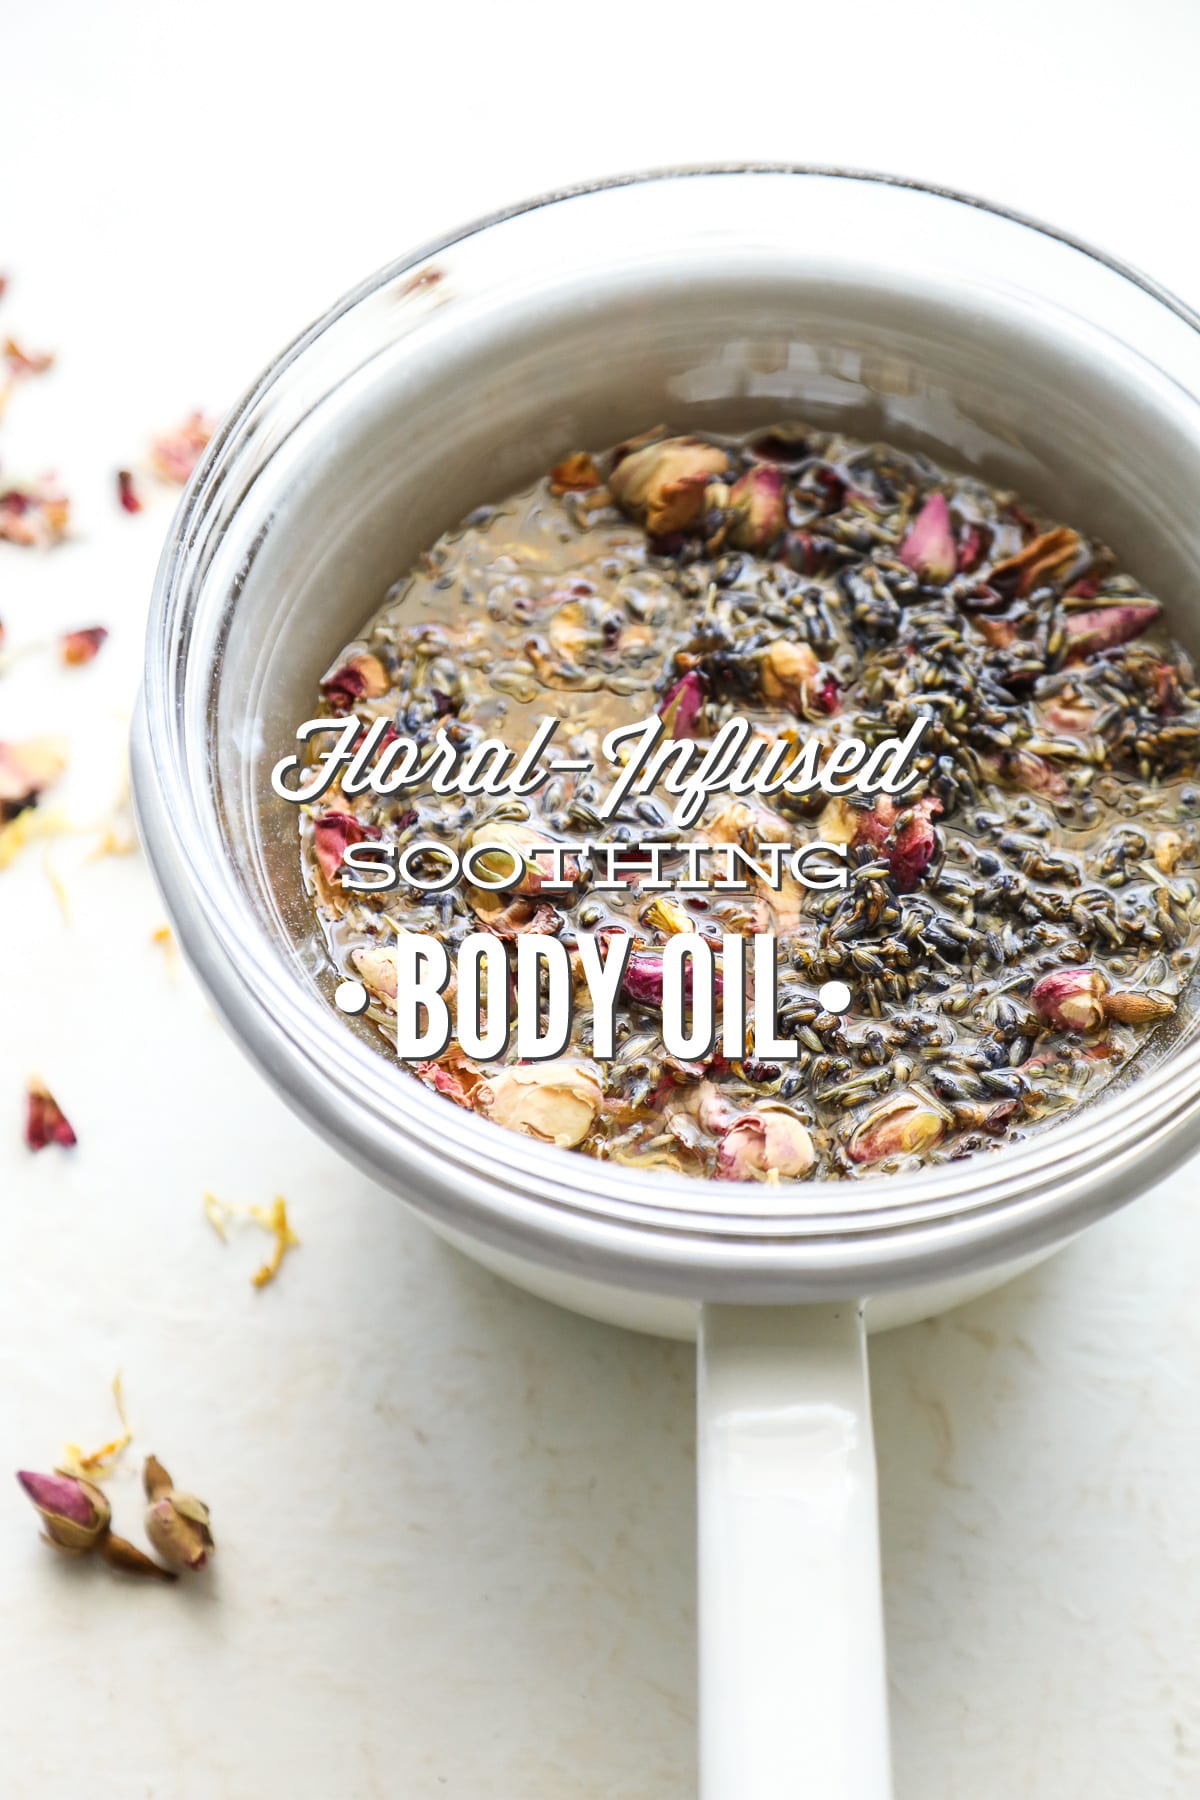 Floral-Infused Soothing Body Oil